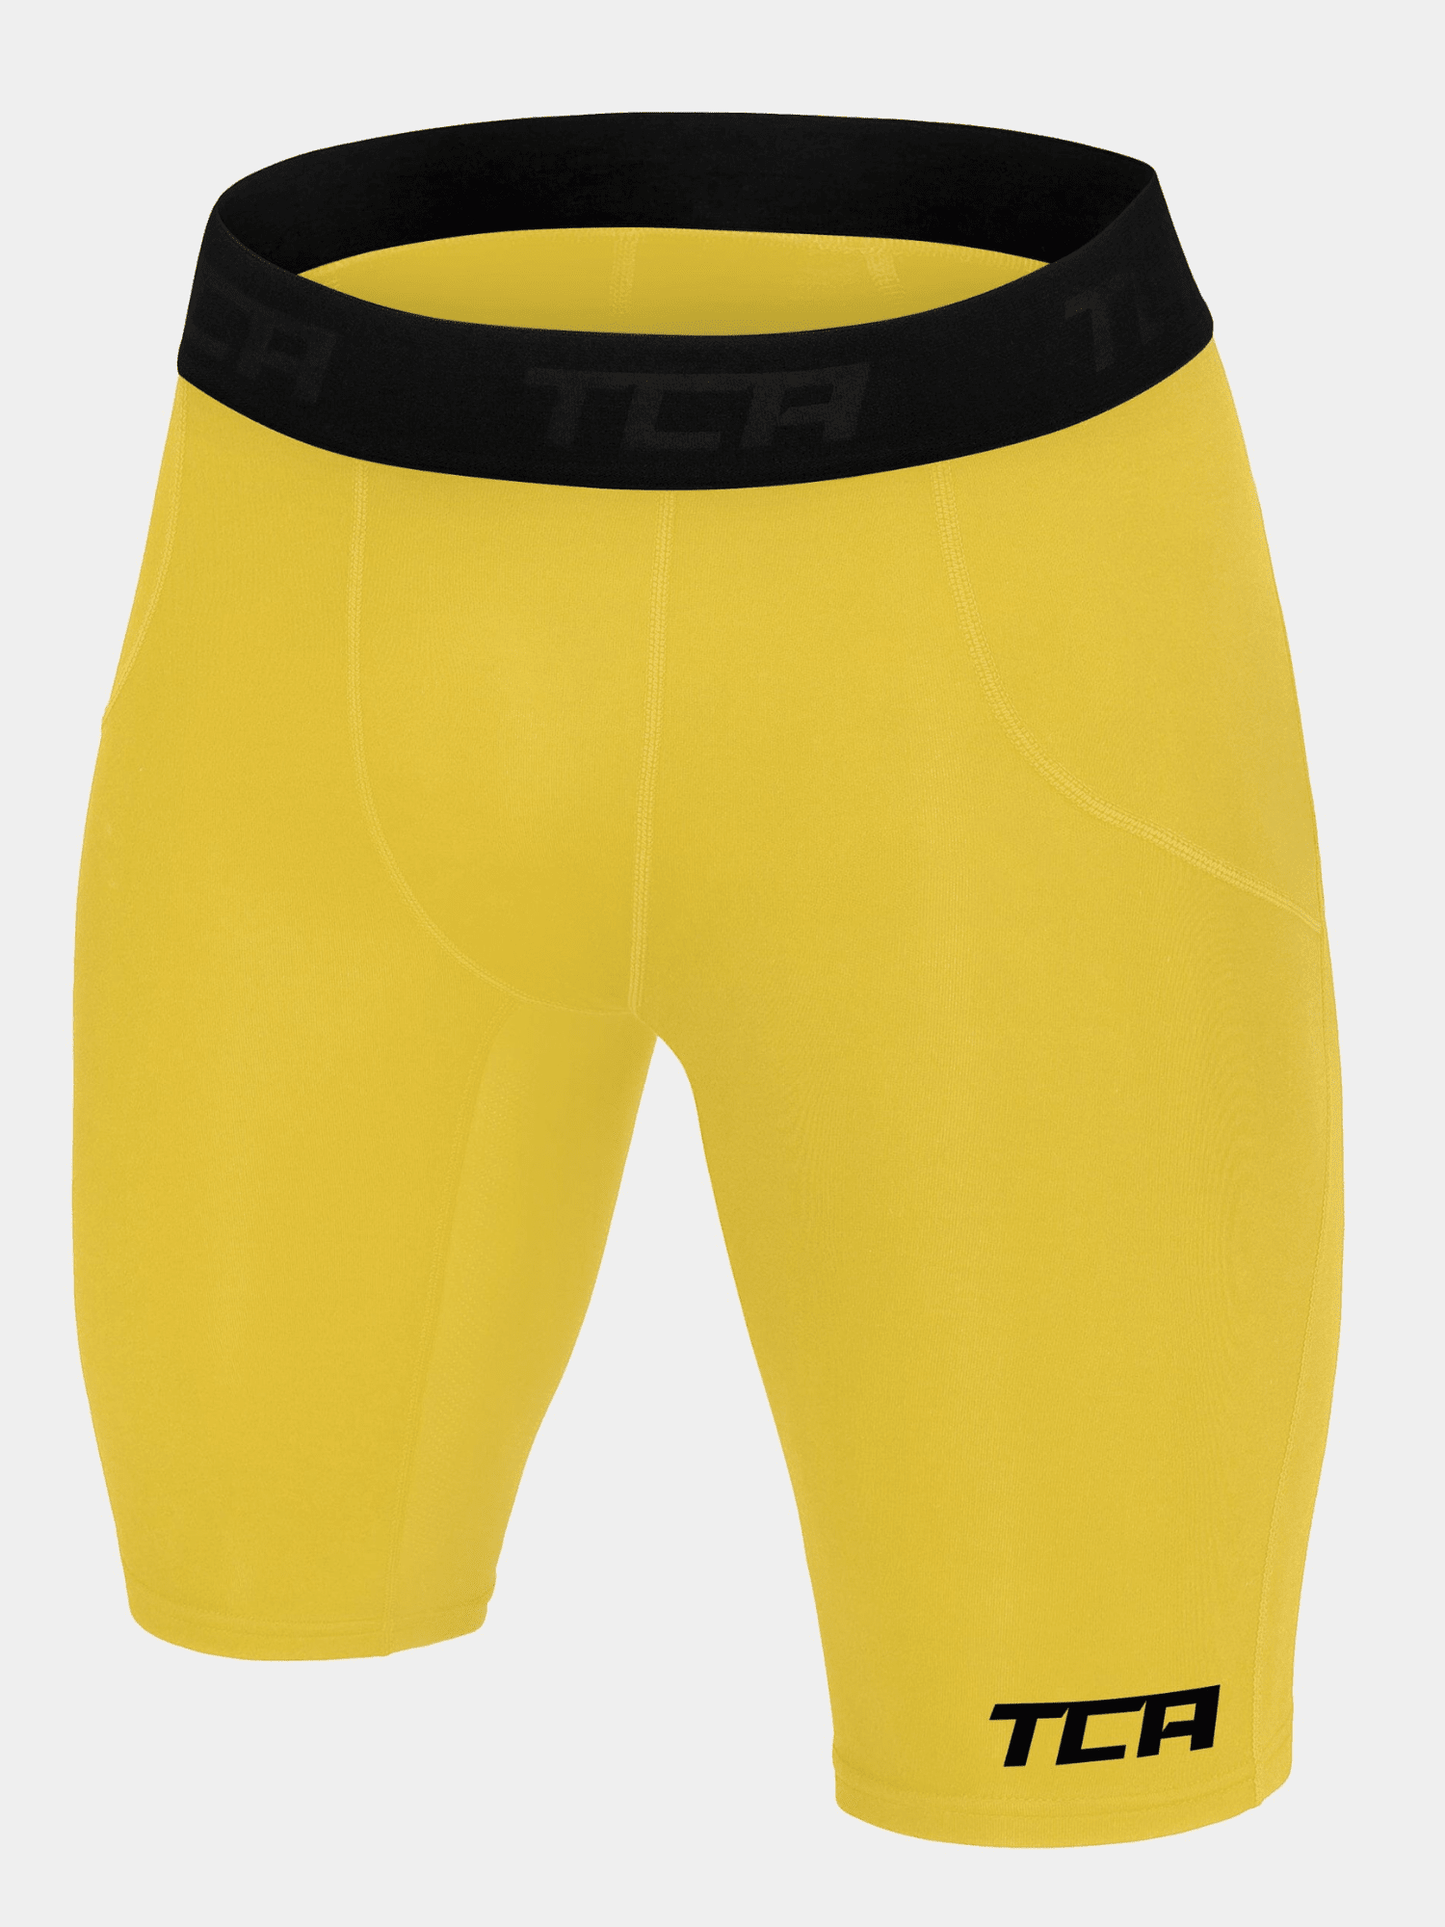 SuperThermal Compression Base Layer Shorts For Boys With Brushed Inner Fabric